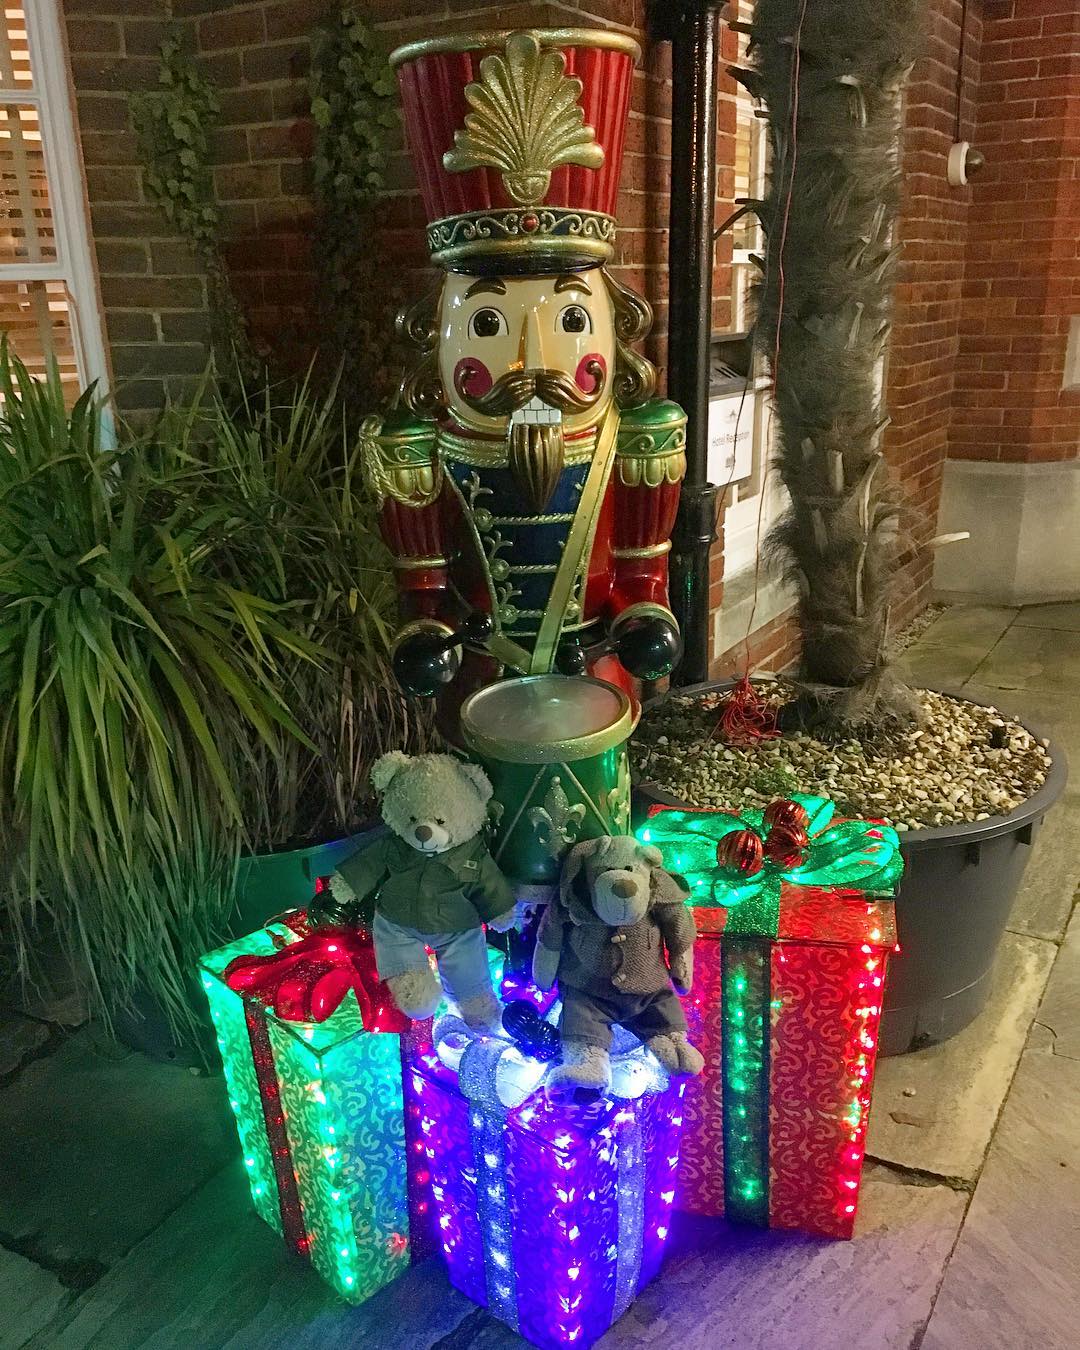 DIY presents created with a wooden frame and mesh material glow with lights outside in front of a large nutcracker. Photo by Instagram user @tedandalfiebears.